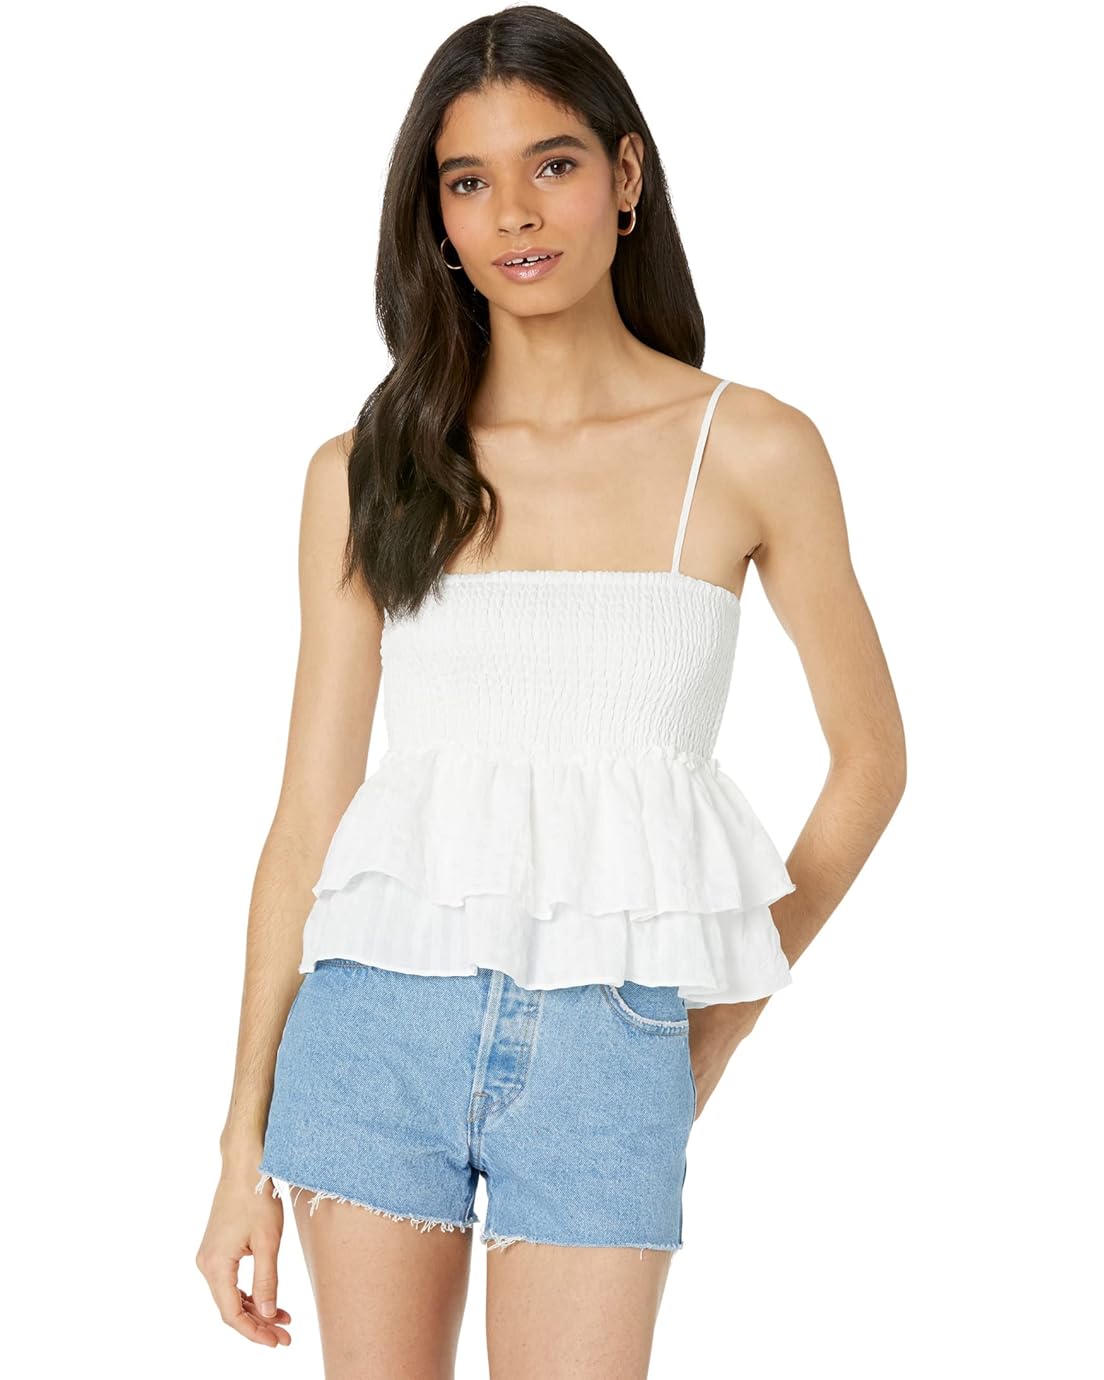 Steve Madden Made For You Top